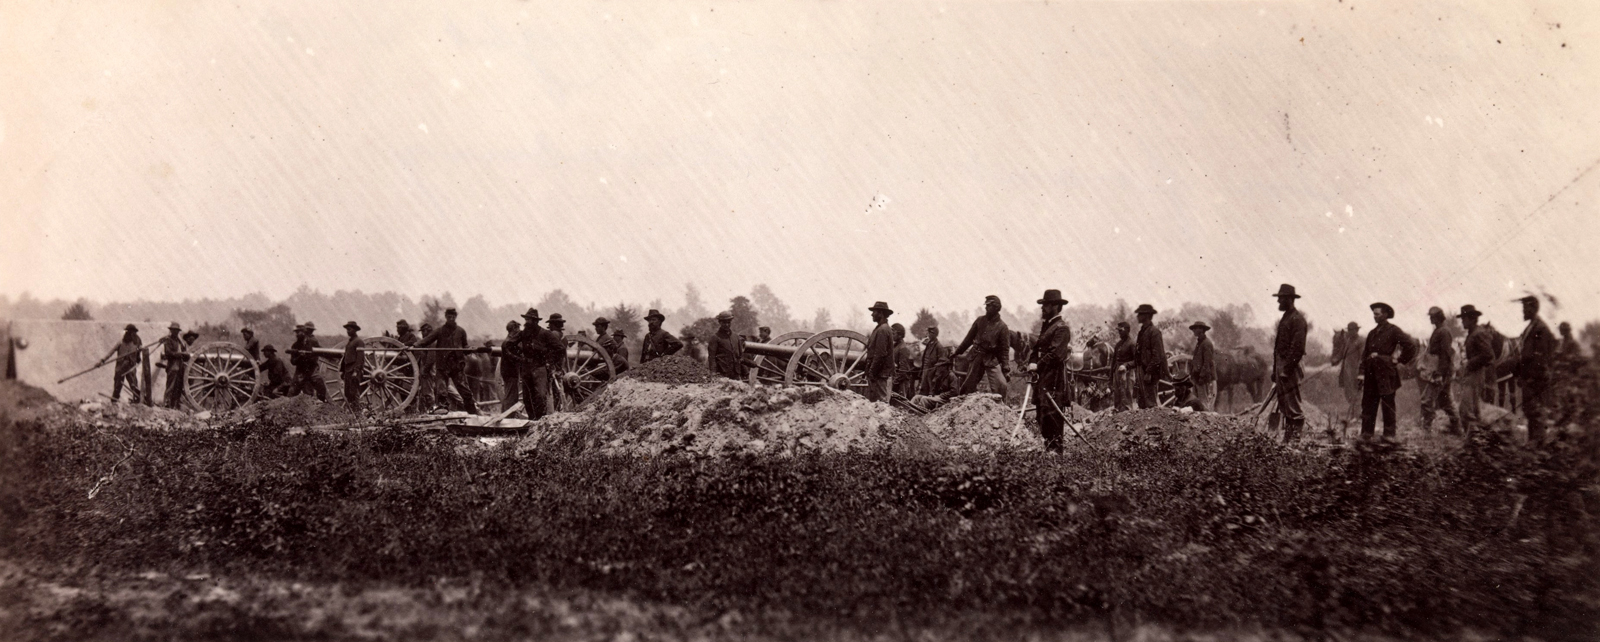 This photograph shows the men and cannons of the Pennsylvania Light Artillery, in 1864.